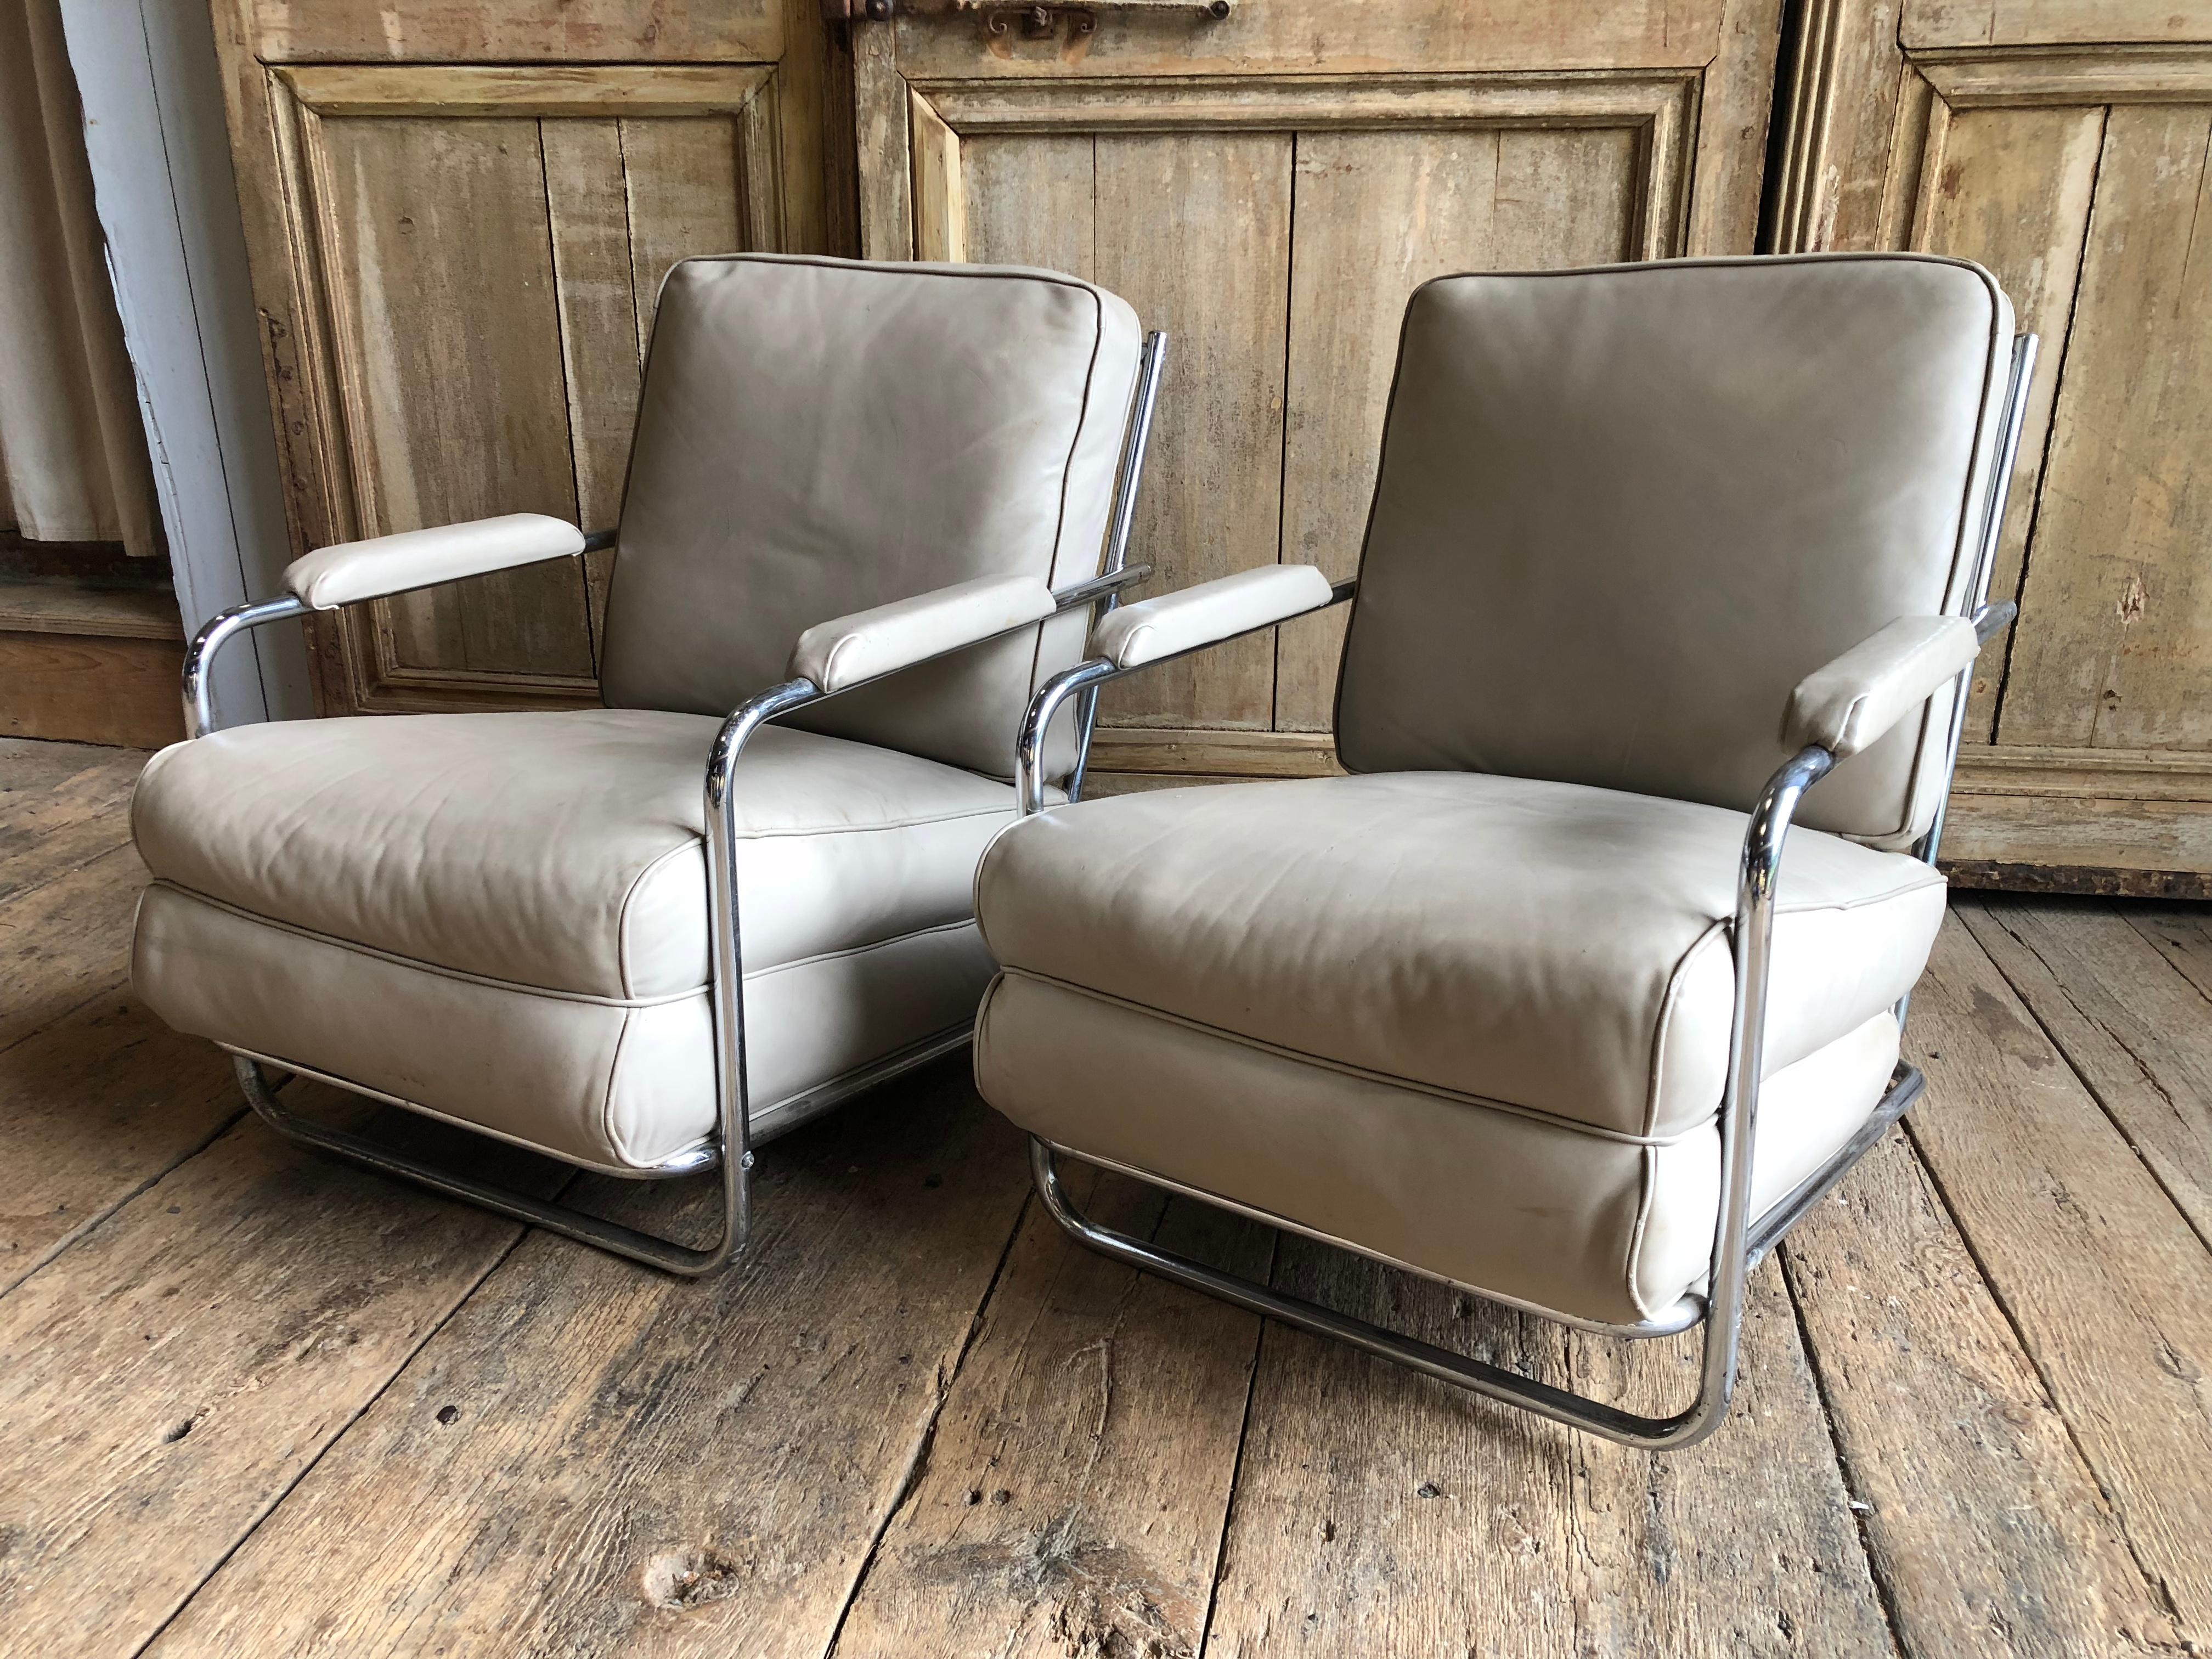 A pair of Art Deco Style chromed tubular steel framed lounge chairs with cream colored leather seats and backs, circa 1933 (in the Troy Sunshade Catalog 1933)